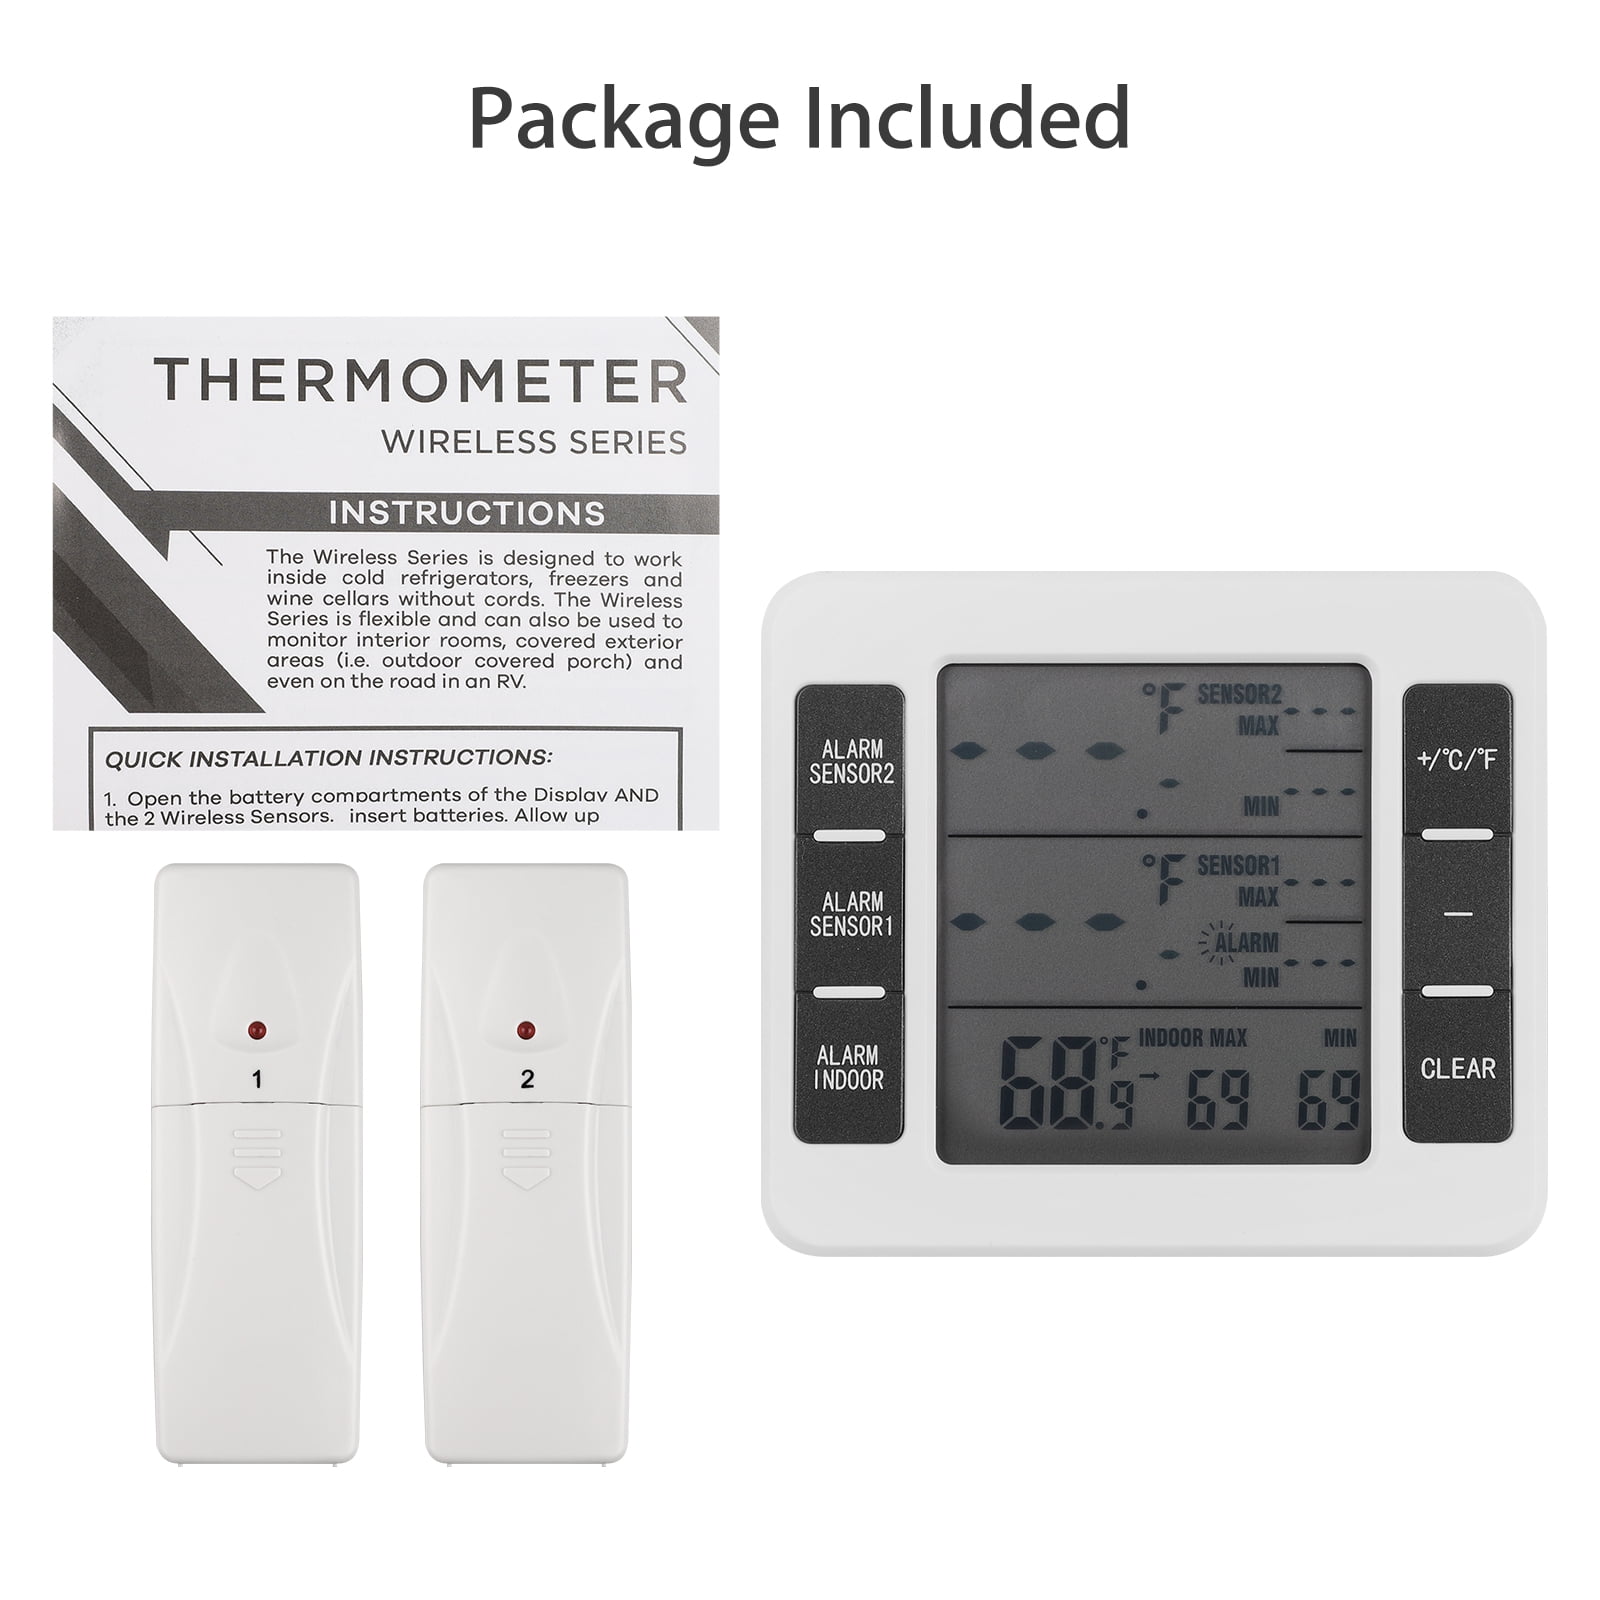 EEEkit 2pcs Digital Refrigerator Thermometers, Freezer Room Thermometers with Max/Min Record and LCD Display, Battery Included, Size: Large, White